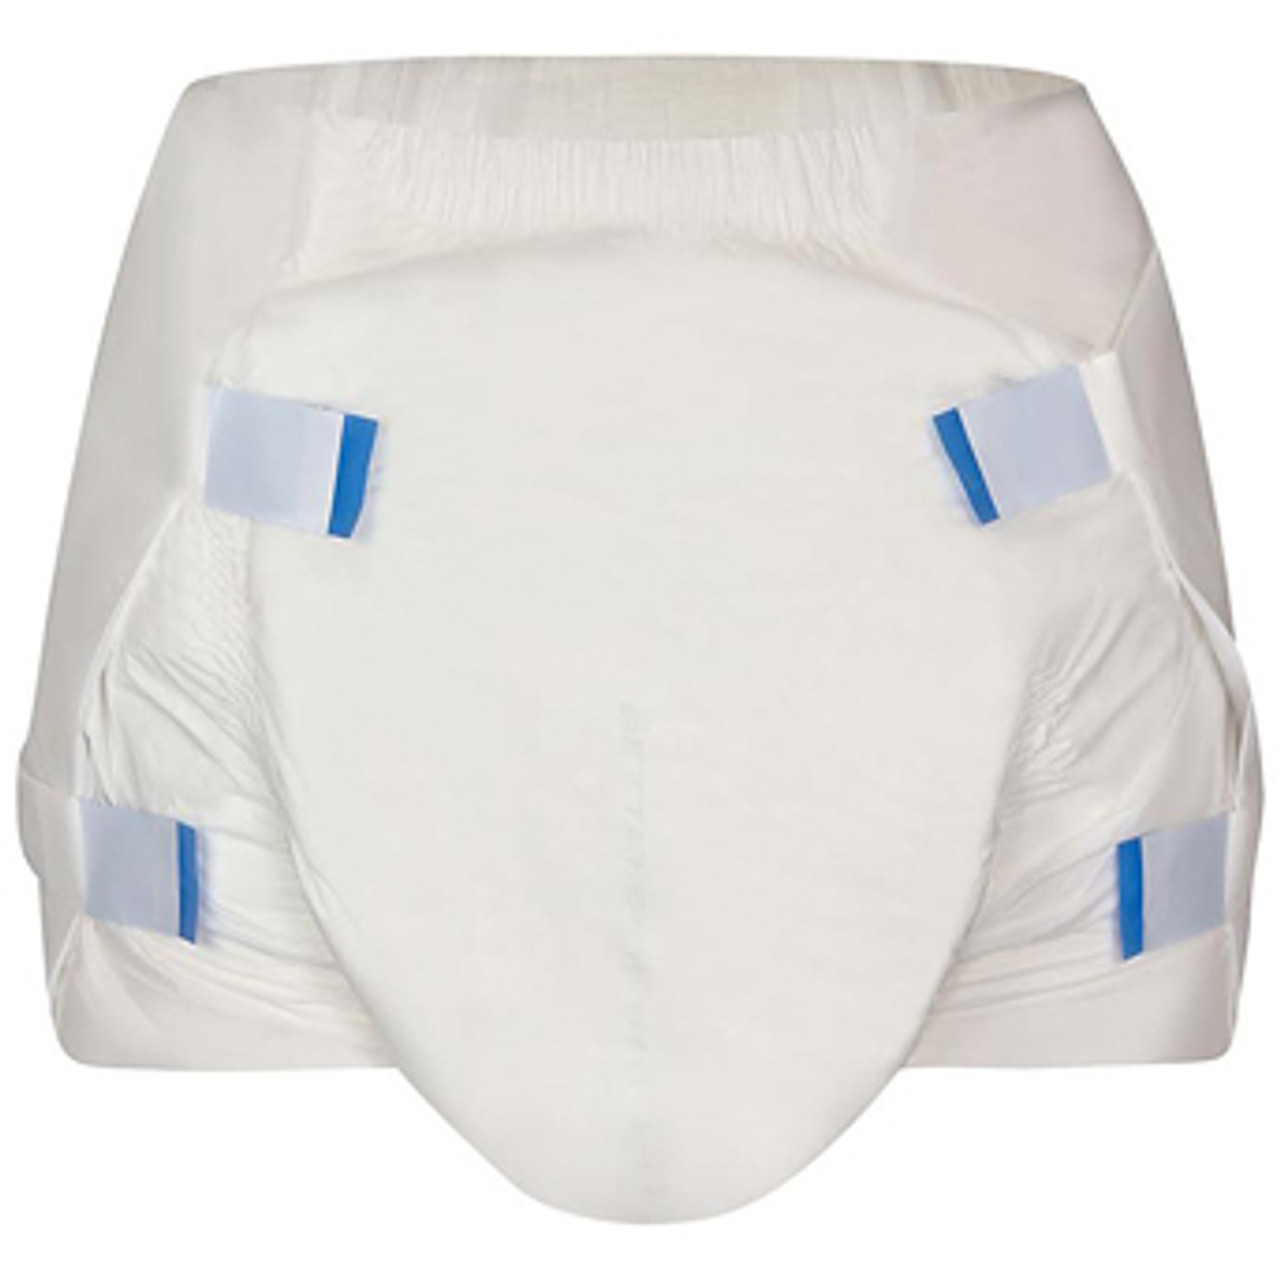 Try Before You Buy: Get Adult Diaper Trial Packs for FREE! - Incontrol  Diapers